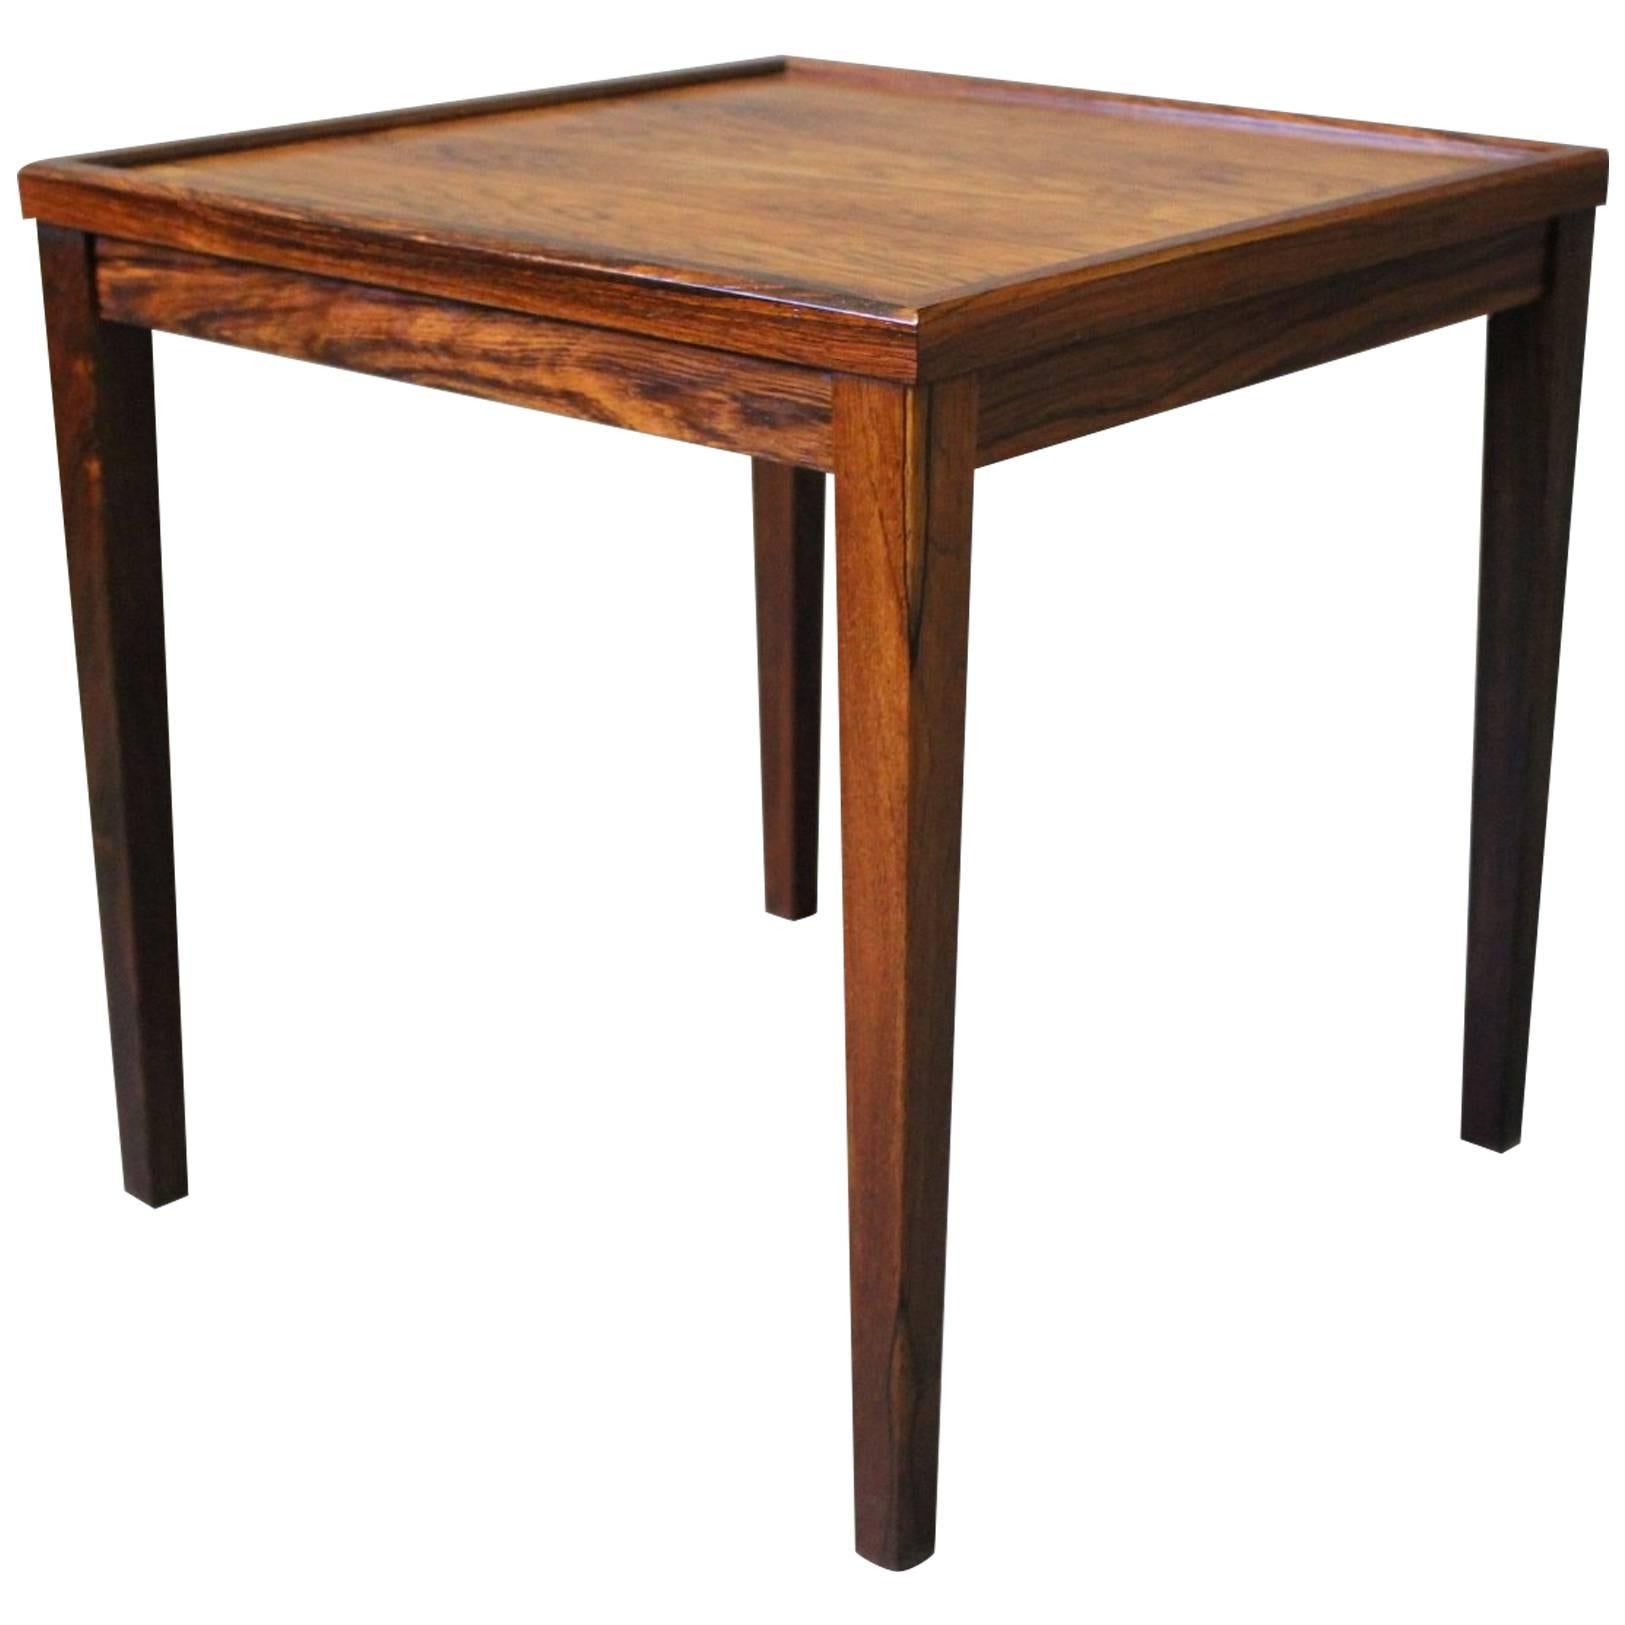 Small Side Table in Rosewood of Danish Design from the 1960s